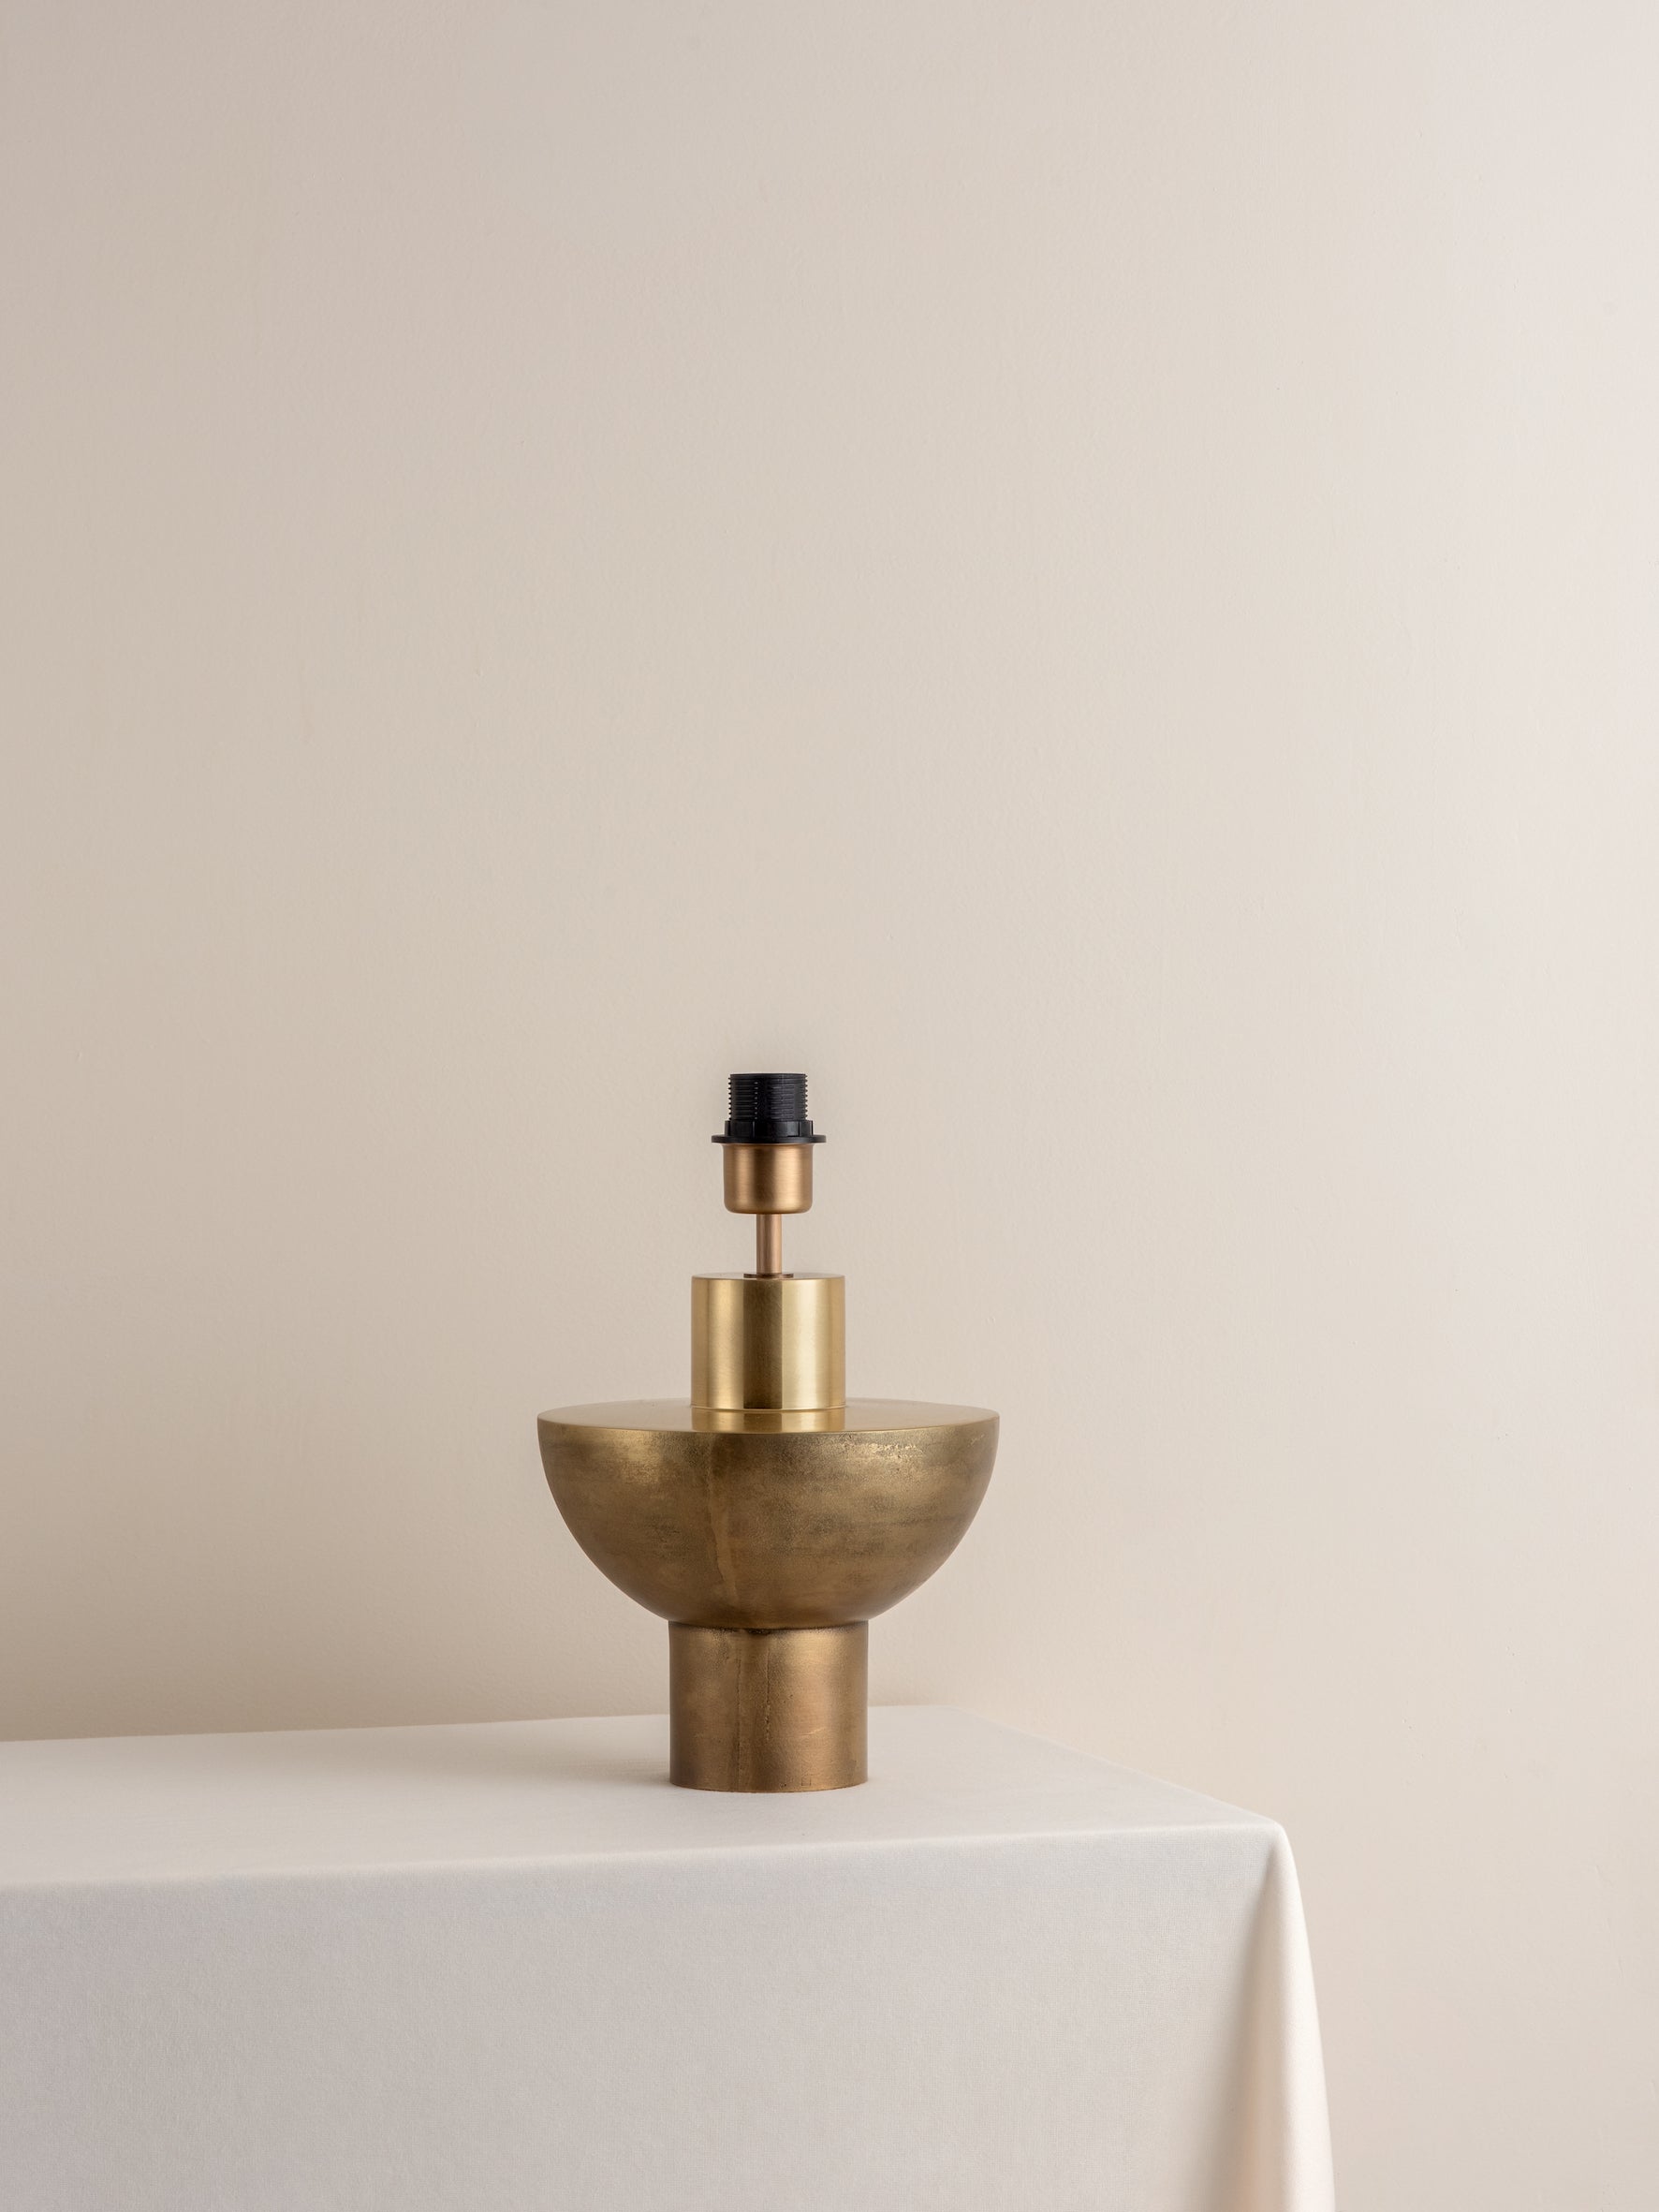 Editions brass lamp with + walnut wood shade | Table Lamp | Lights & Lamps | UK | Modern Affordable Designer Lighting